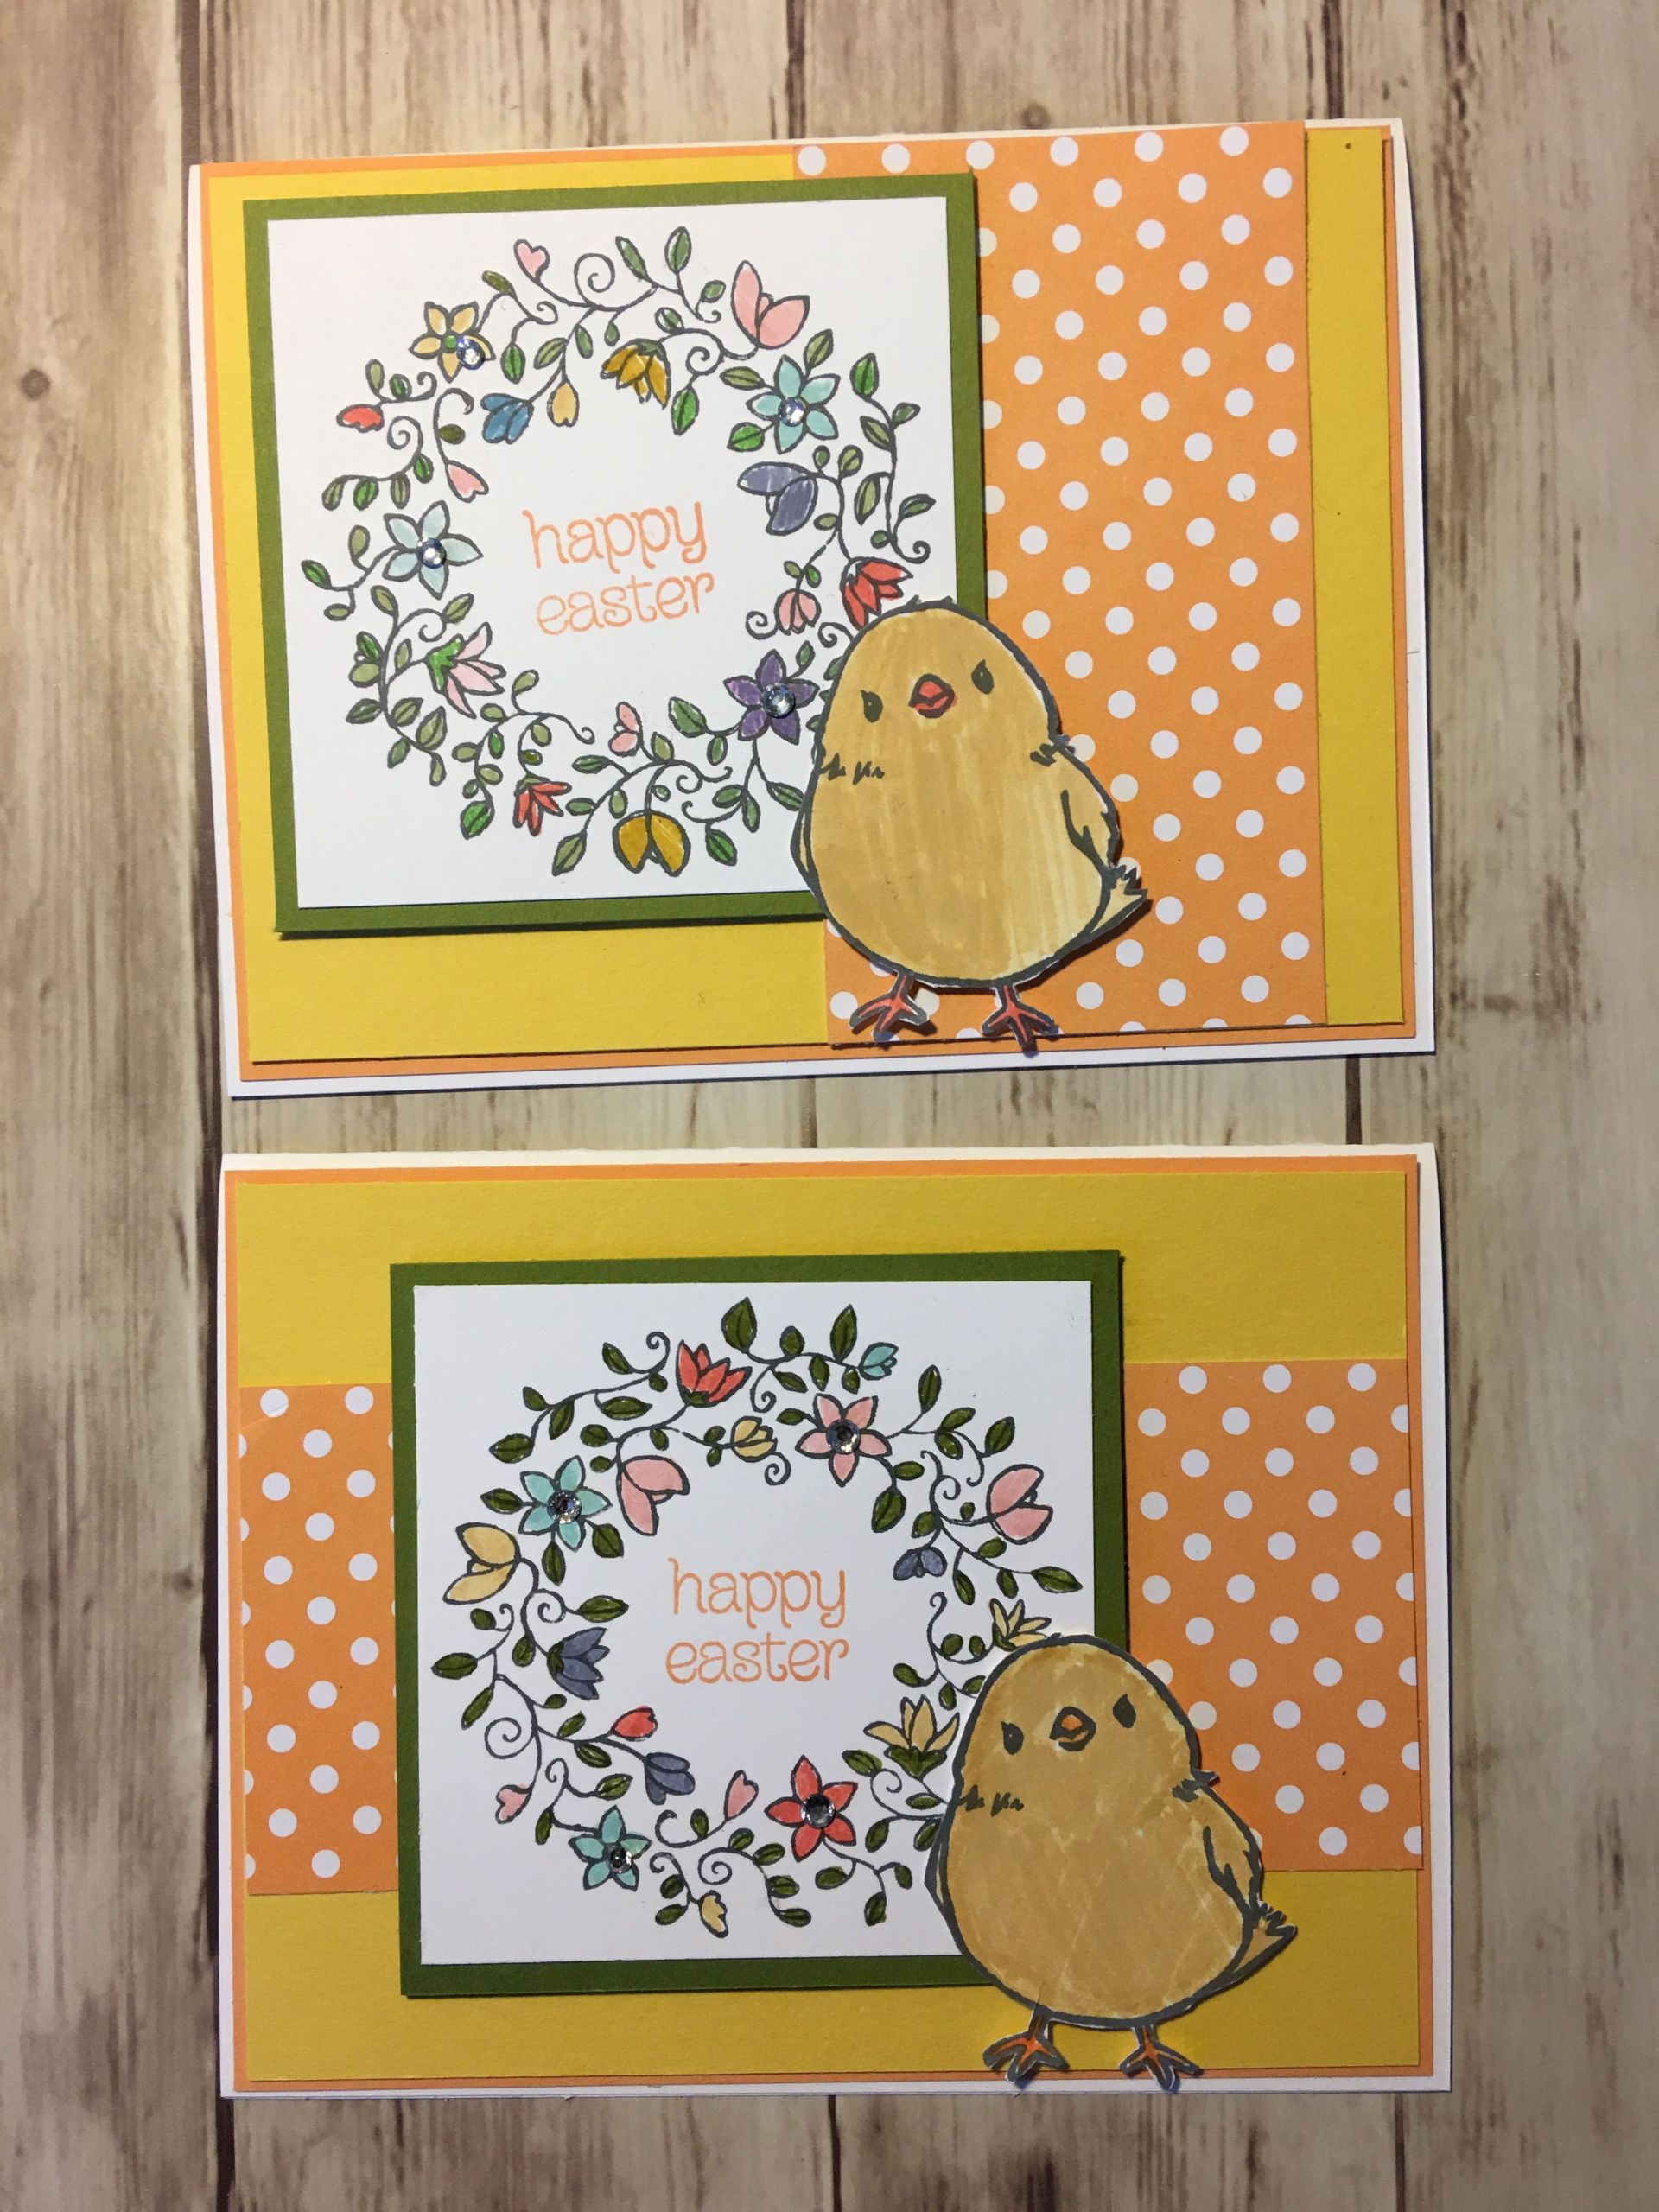 Stampin Up Easter Cards Ideas
 Pin on Card making my new obsession